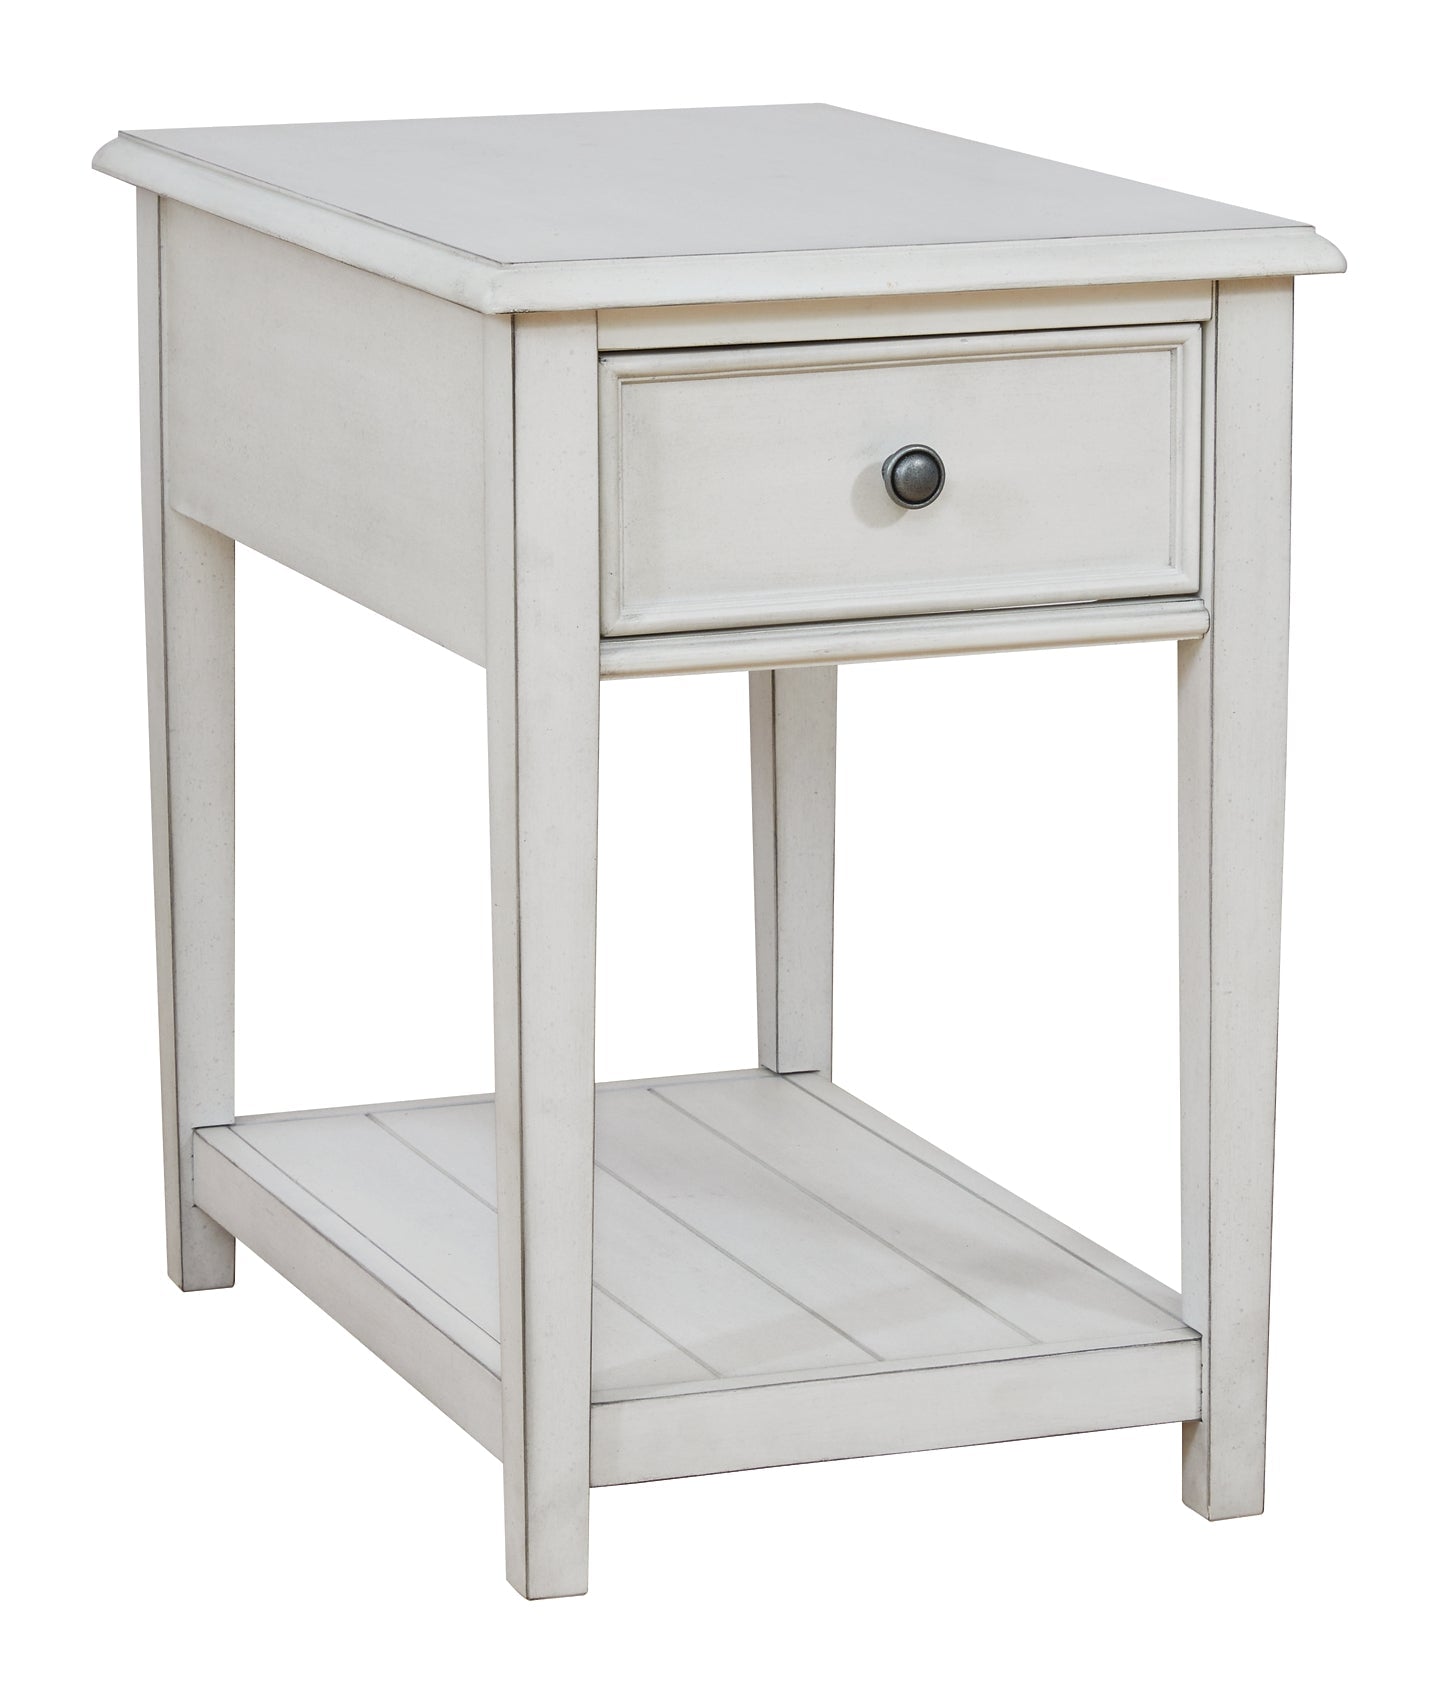 Kanwyn 2 End Tables at Walker Mattress and Furniture Locations in Cedar Park and Belton TX.